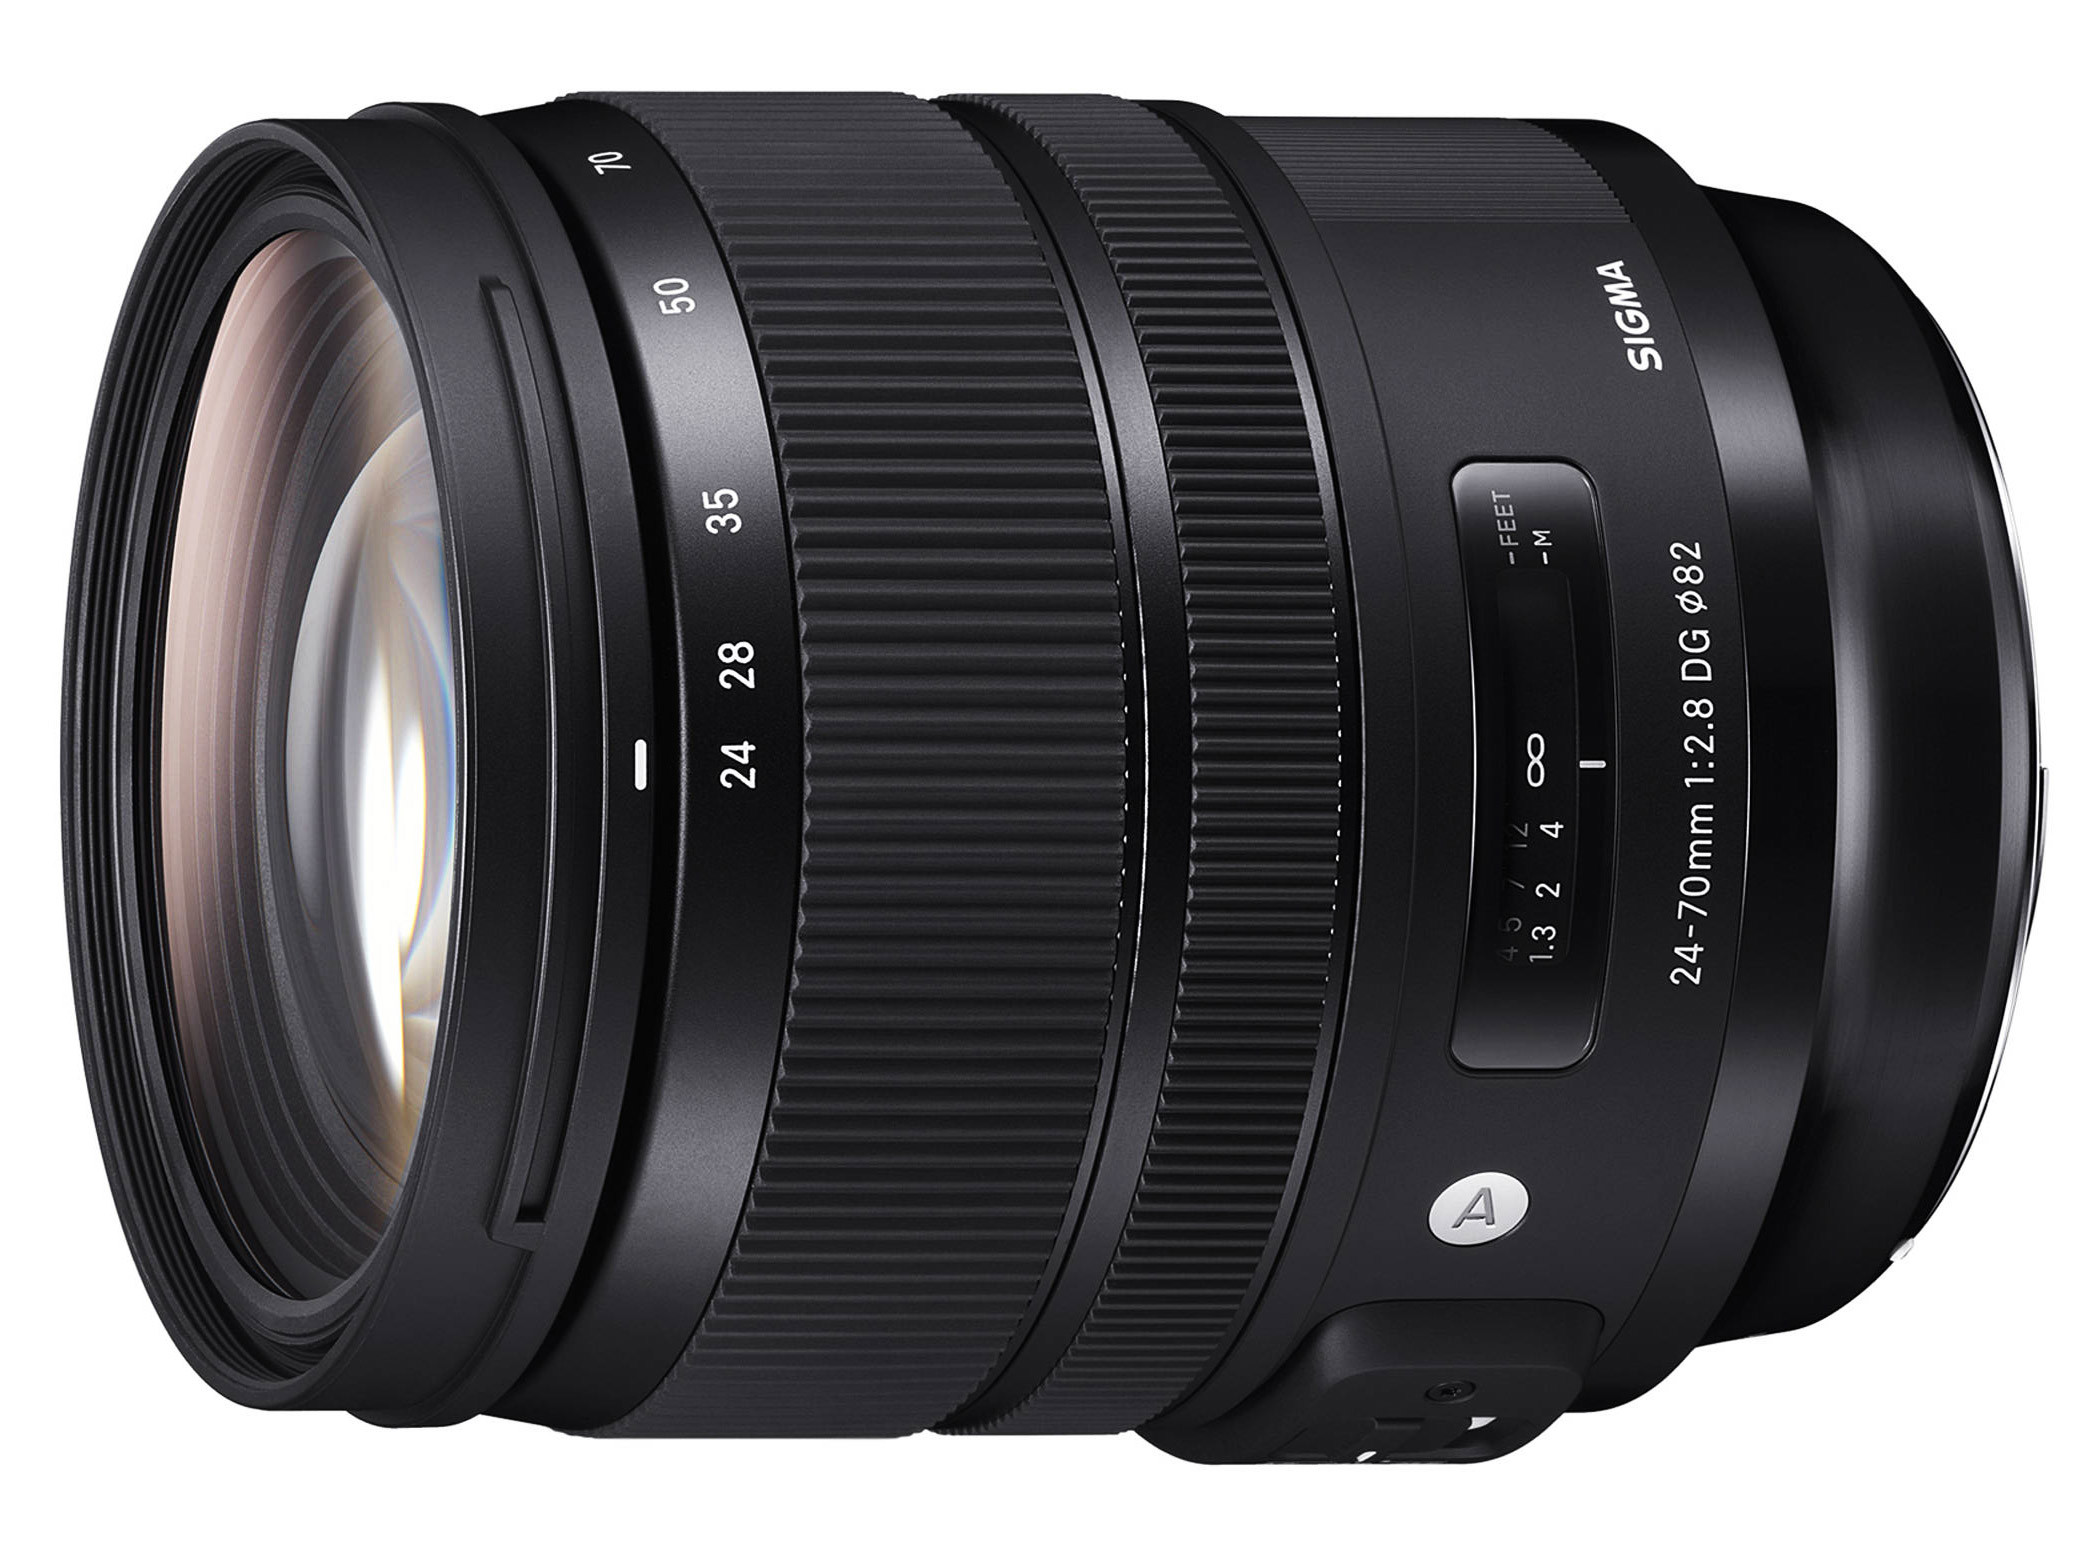 Sigma 24-70mm f/2.8 DG OS HSM Art: Versatile zoom for photography and video.